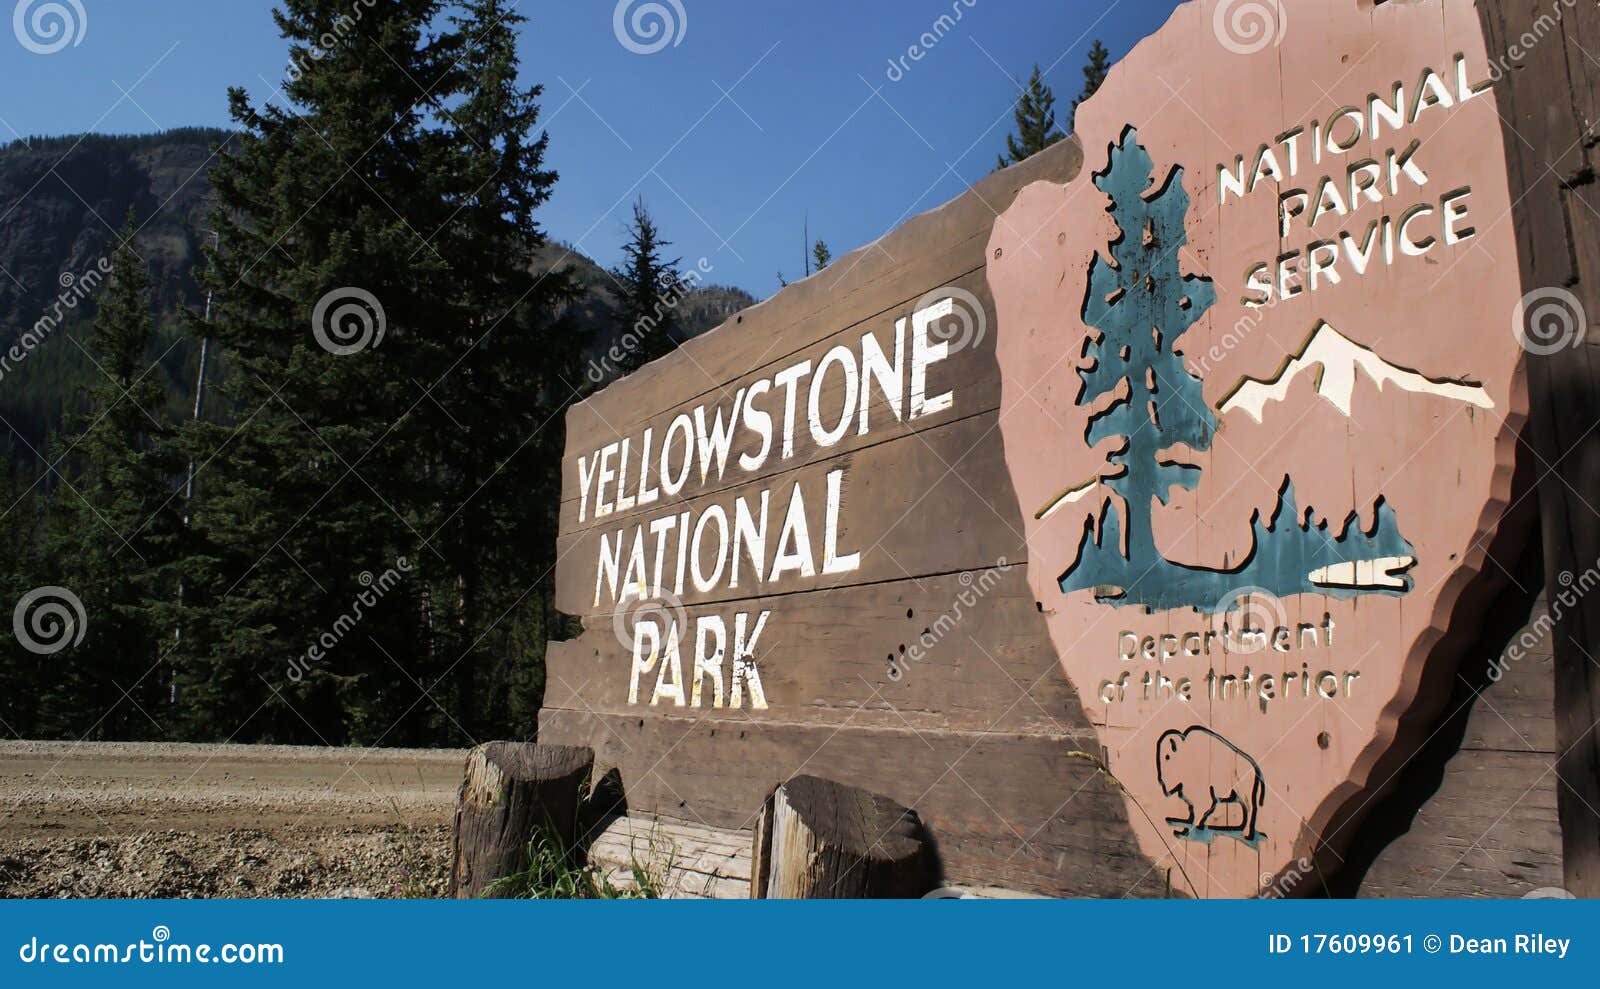 yellowstone park sign